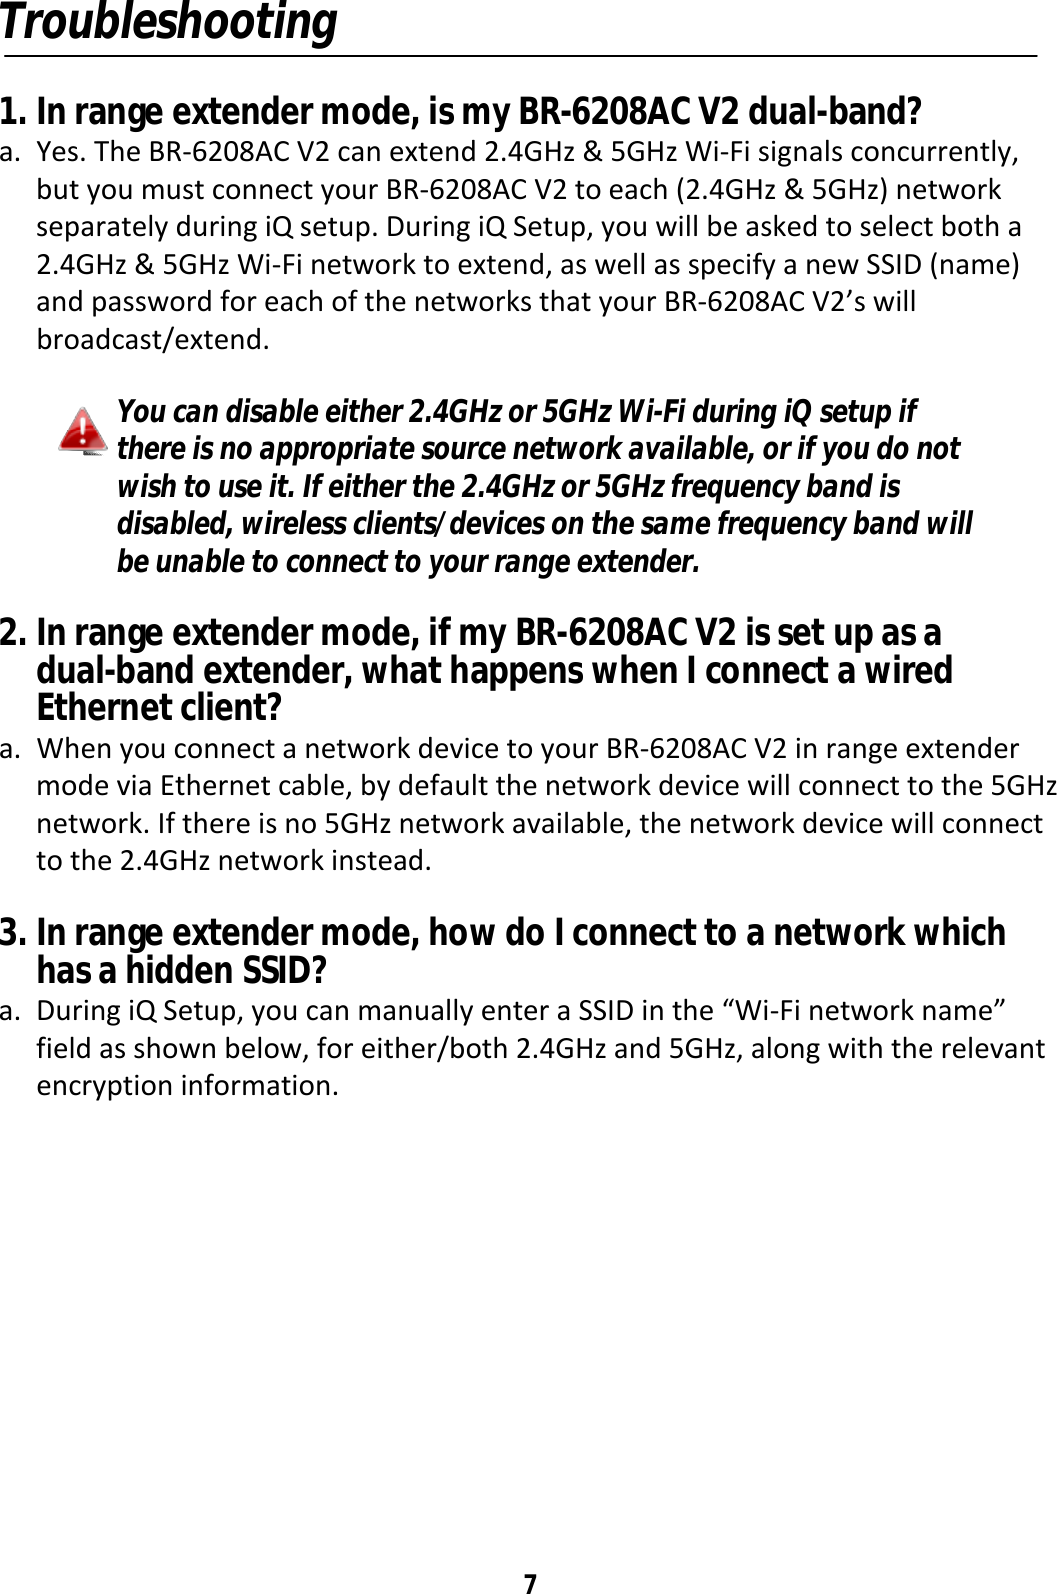 7 Troubleshooting  1. In range extender mode, is my BR-6208AC V2 dual-band? a. Yes. The BR-6208AC V2 can extend 2.4GHz &amp; 5GHz Wi-Fi signals concurrently, but you must connect your BR-6208AC V2 to each (2.4GHz &amp; 5GHz) network separately during iQ setup. During iQ Setup, you will be asked to select both a 2.4GHz &amp; 5GHz Wi-Fi network to extend, as well as specify a new SSID (name) and password for each of the networks that your BR-6208AC V2’s will broadcast/extend.  You can disable either 2.4GHz or 5GHz Wi-Fi during iQ setup if there is no appropriate source network available, or if you do not wish to use it. If either the 2.4GHz or 5GHz frequency band is disabled, wireless clients/devices on the same frequency band will be unable to connect to your range extender.  2. In range extender mode, if my BR-6208AC V2 is set up as a dual-band extender, what happens when I connect a wired Ethernet client? a. When you connect a network device to your BR-6208AC V2 in range extender mode via Ethernet cable, by default the network device will connect to the 5GHz network. If there is no 5GHz network available, the network device will connect to the 2.4GHz network instead.  3. In range extender mode, how do I connect to a network which has a hidden SSID? a. During iQ Setup, you can manually enter a SSID in the “Wi-Fi network name” field as shown below, for either/both 2.4GHz and 5GHz, along with the relevant encryption information.  